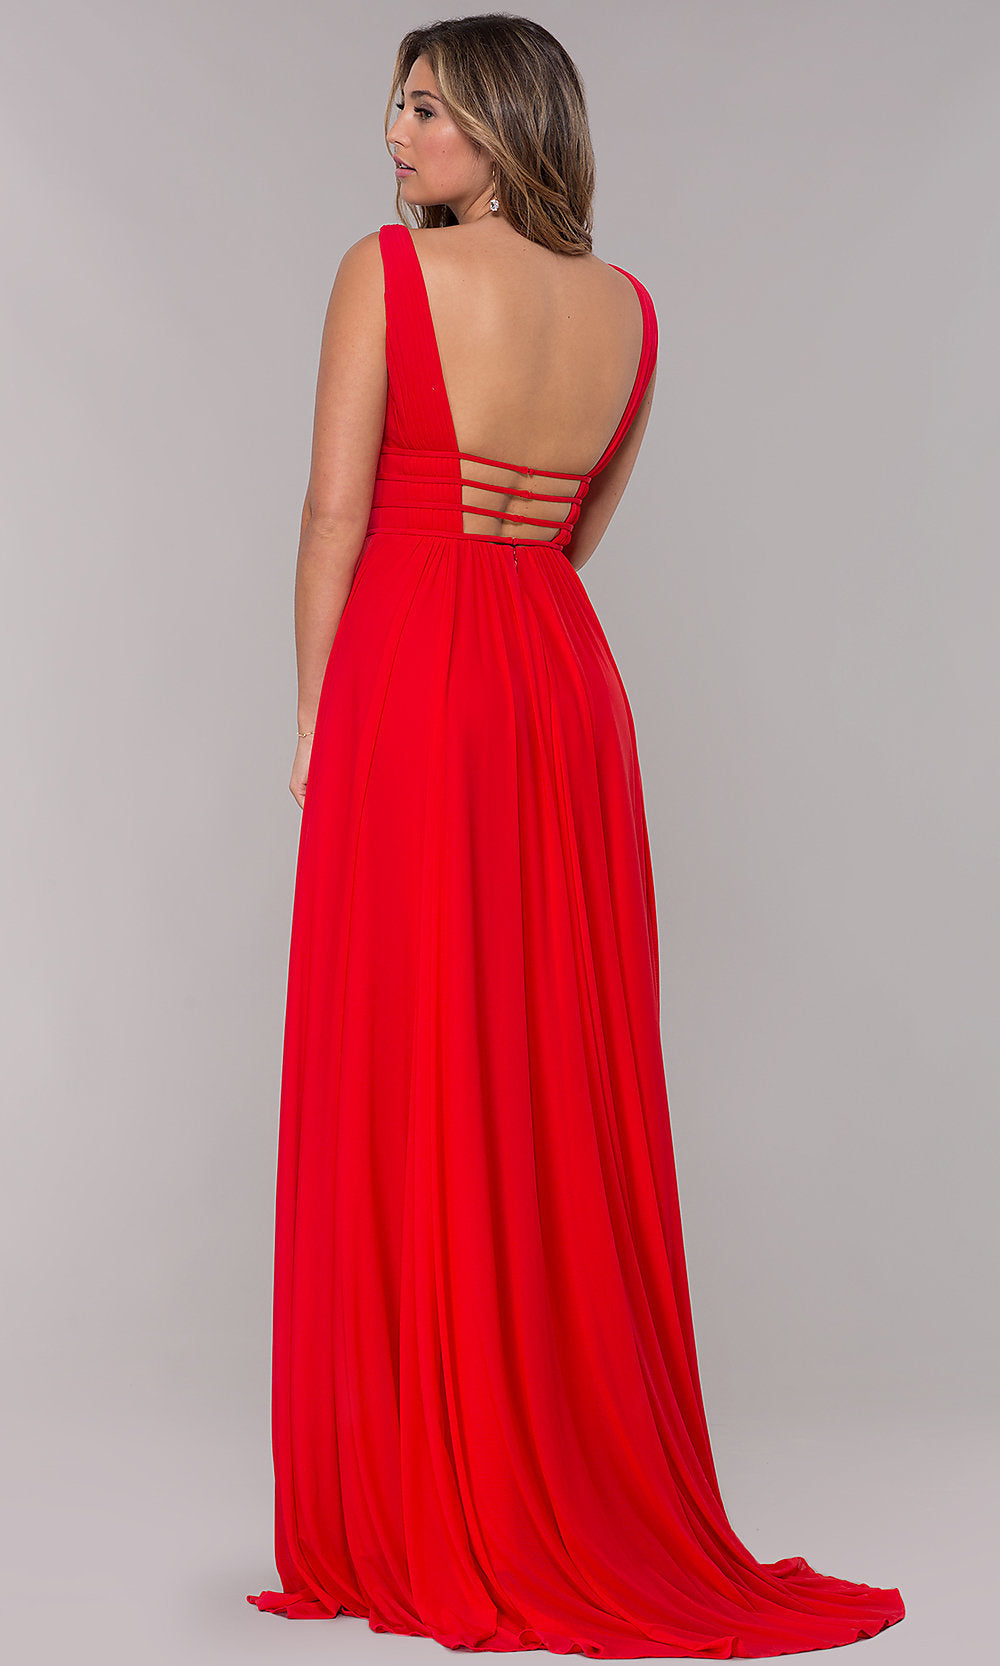 Red Ruched-Bodice Long Formal JVN by Jovani Prom Dress